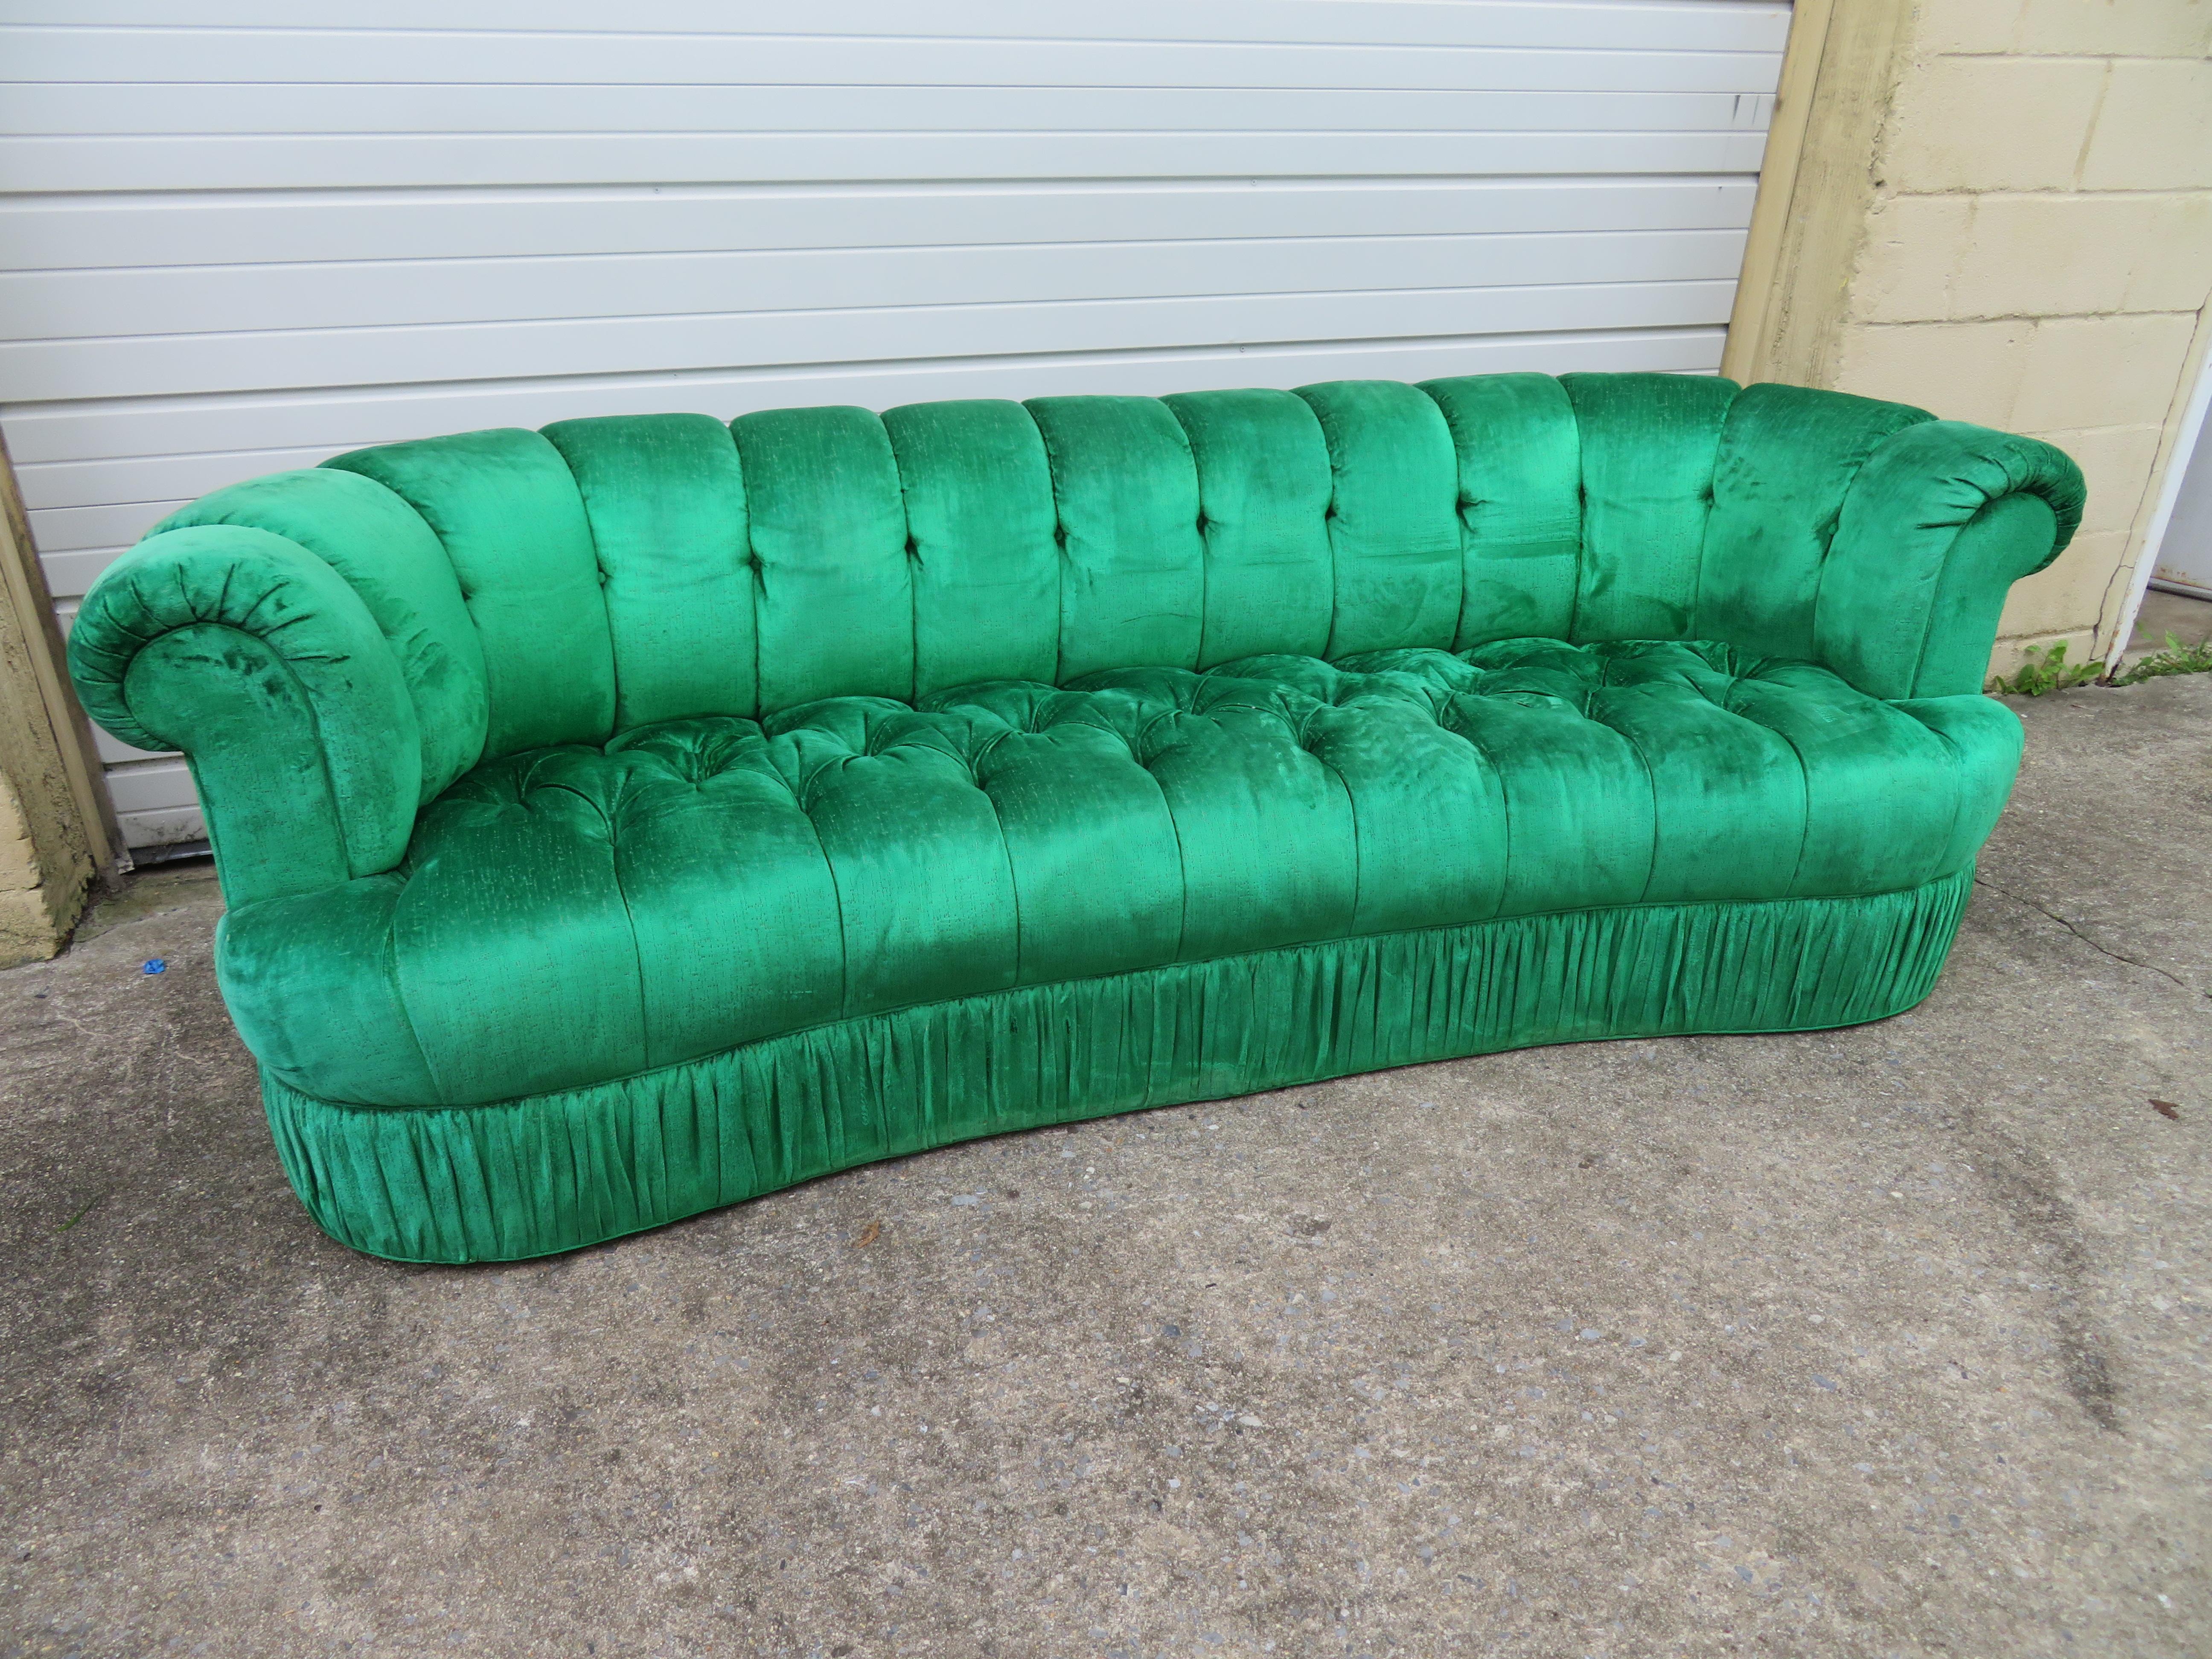 Spectacular Hollywood Regency kidney shaped tufted sofa. This piece is a true vintage gem from the 1970s upholstered in a gorgeous emerald green velvet. The fabric is still in fabulous condition and is just gorgeous as is.